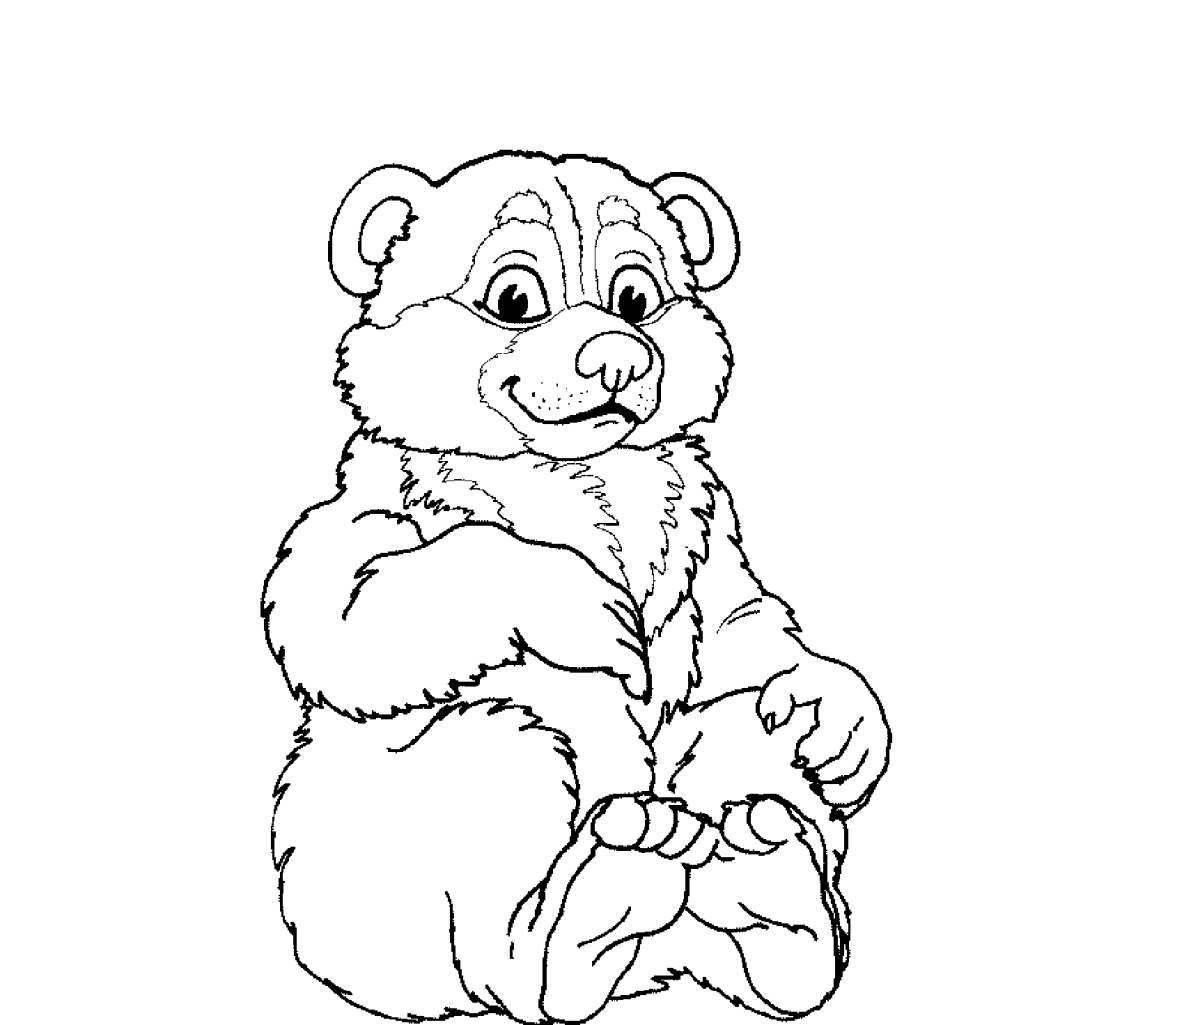 Fluffy bear coloring